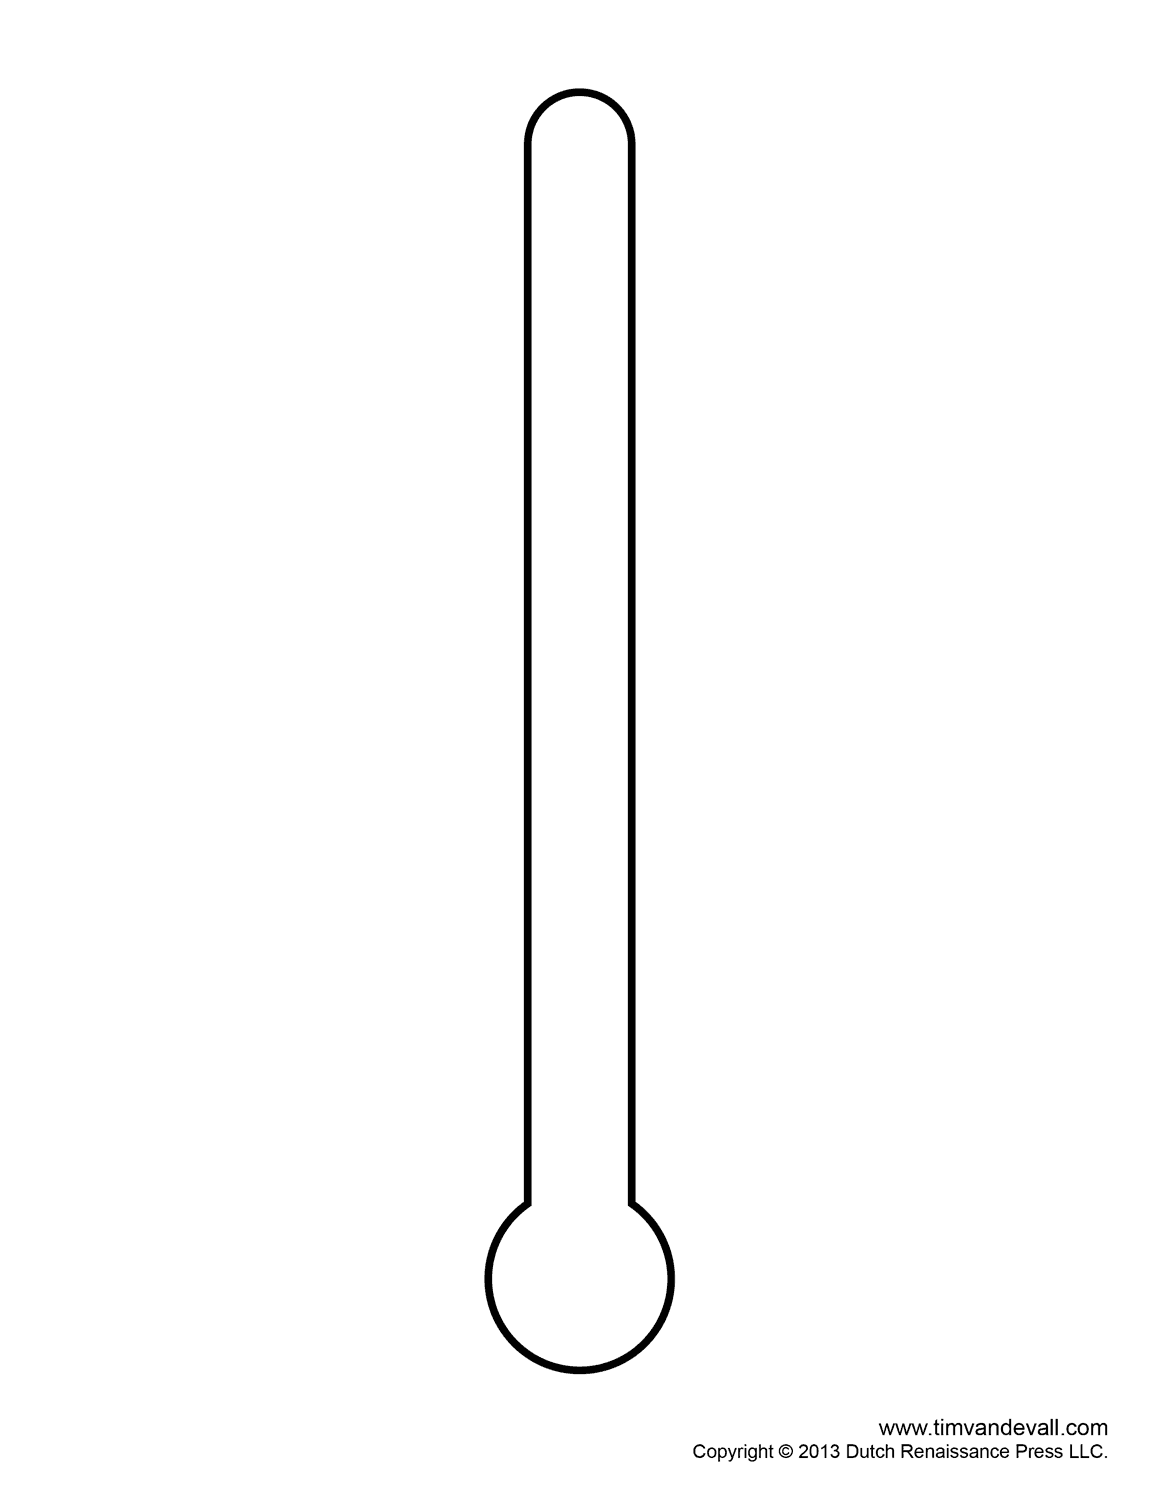 Fundraising thermometer clipart